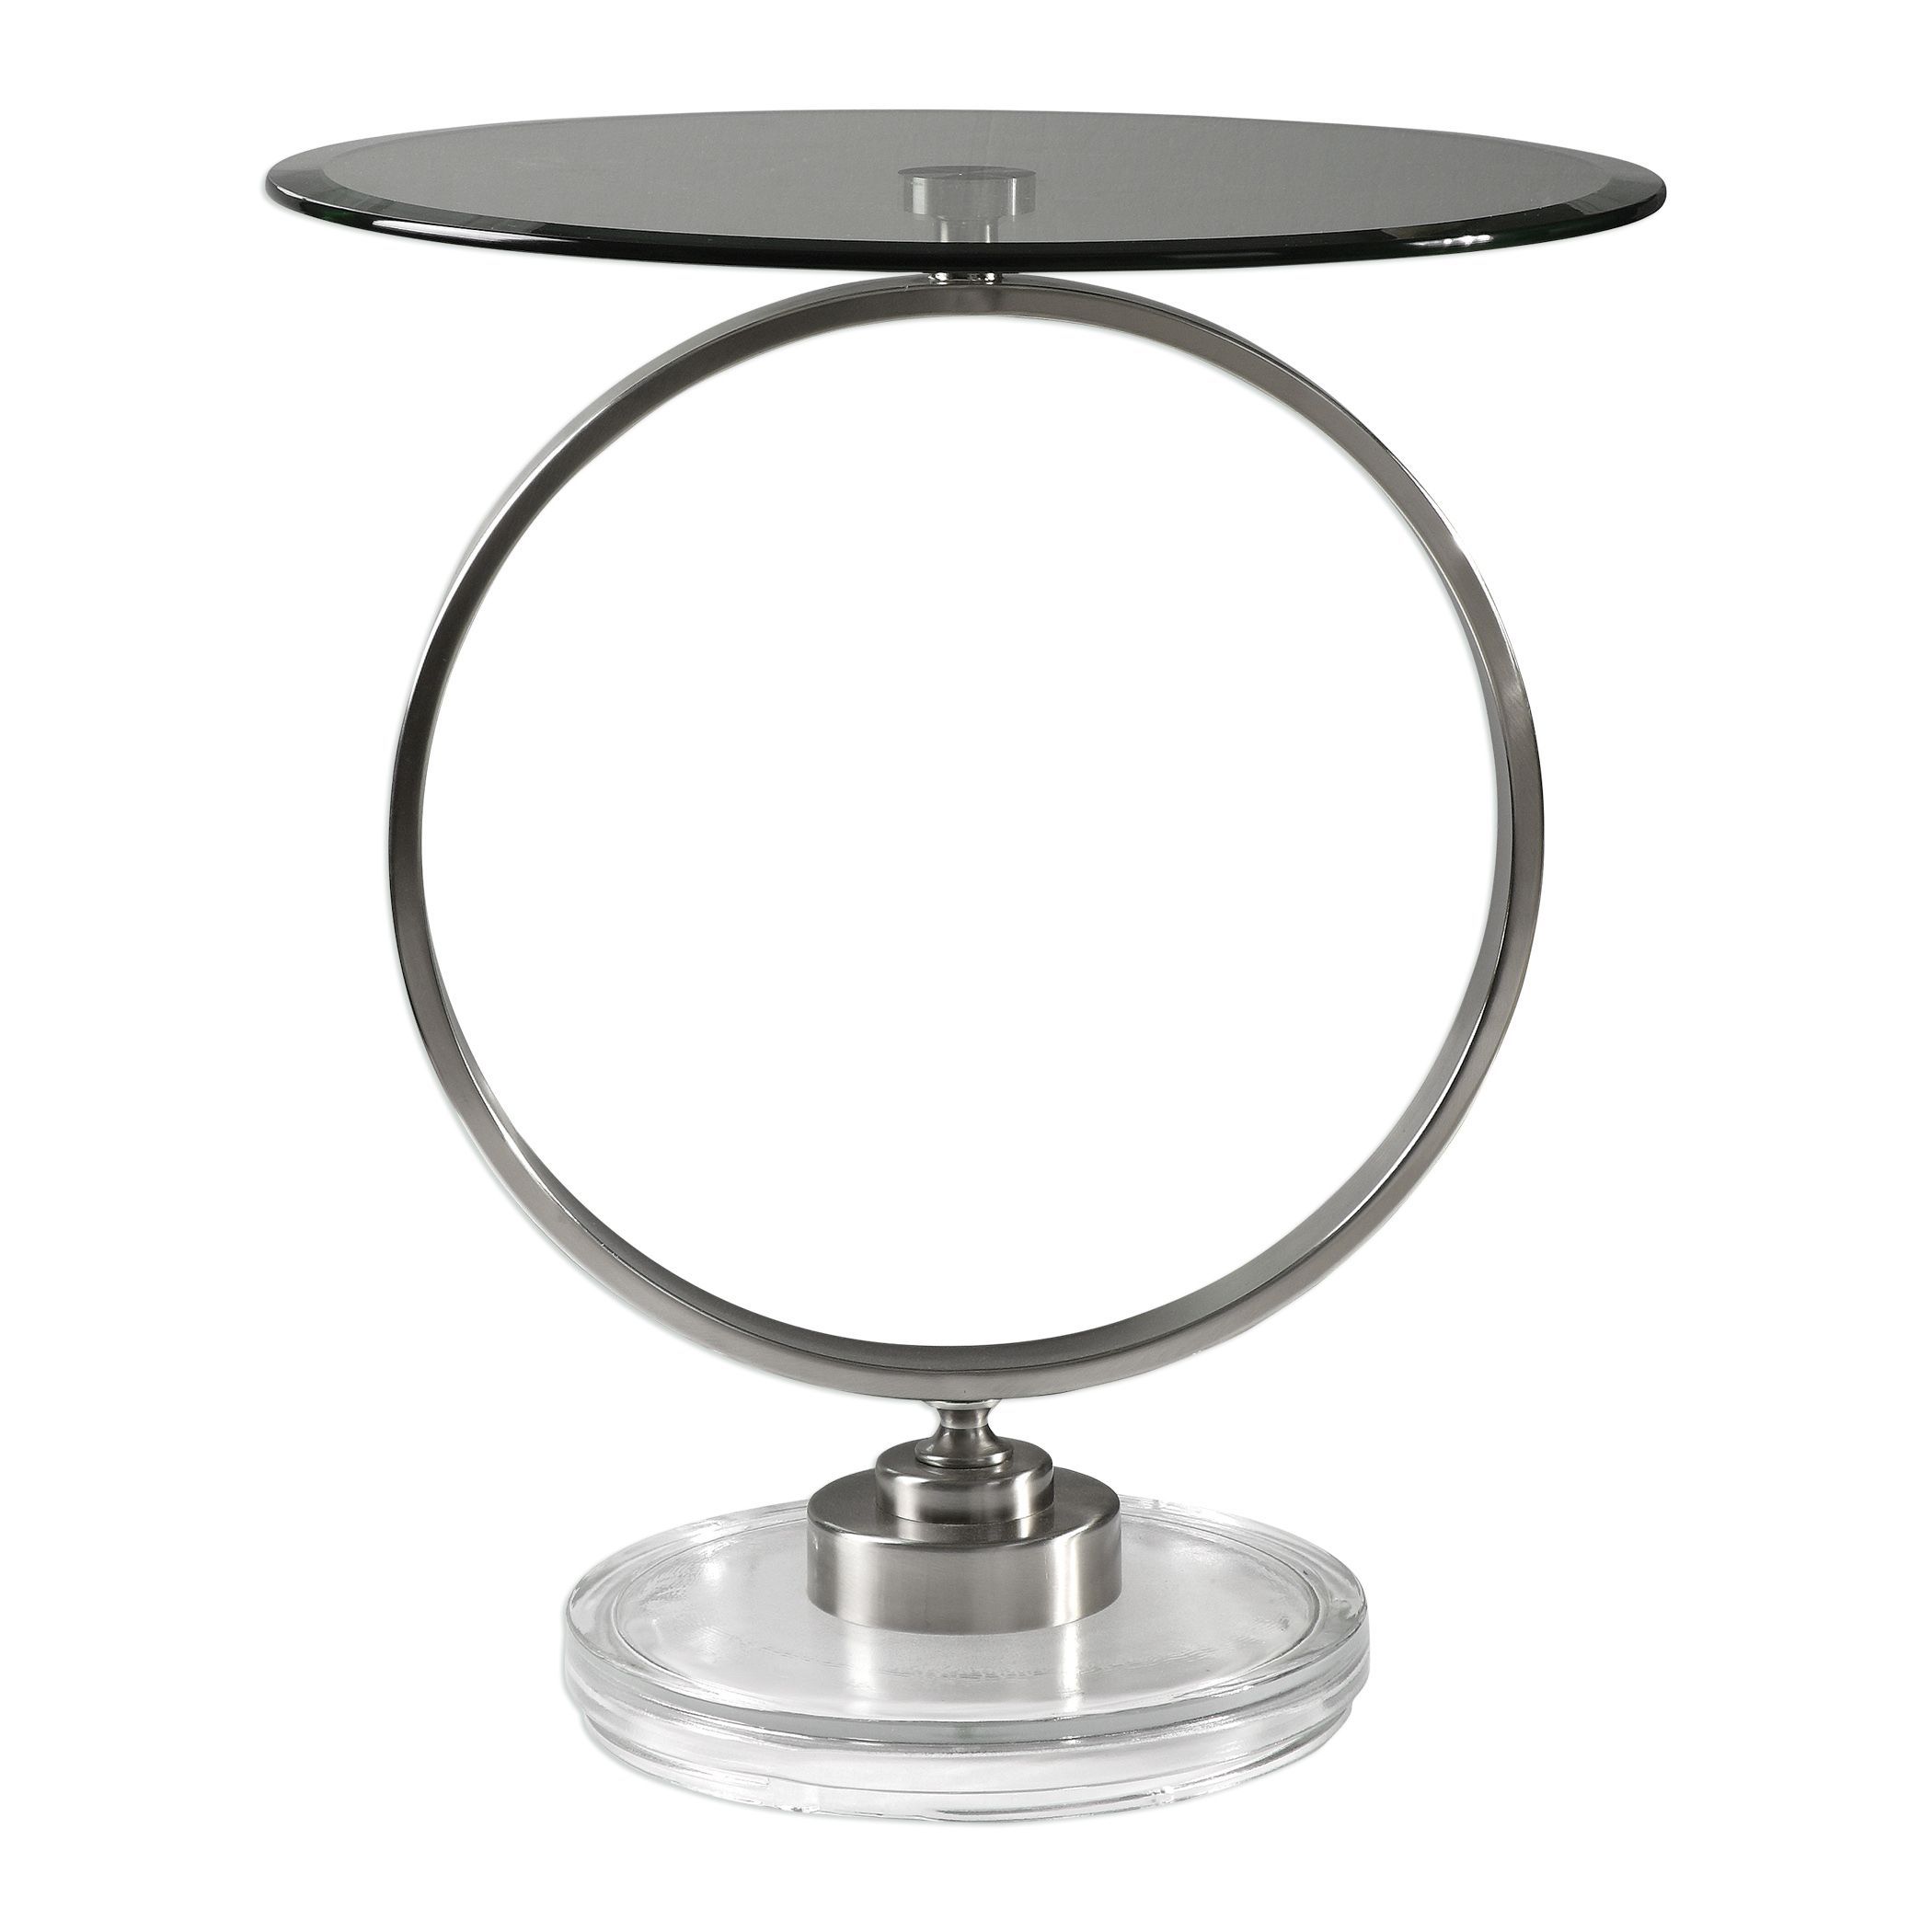 dixon contemporary brushed nickel round accent table uttermost kohls floor lamps ikea desk bamboo nesting tables mid century modern dining set living room ideas the brick coffee